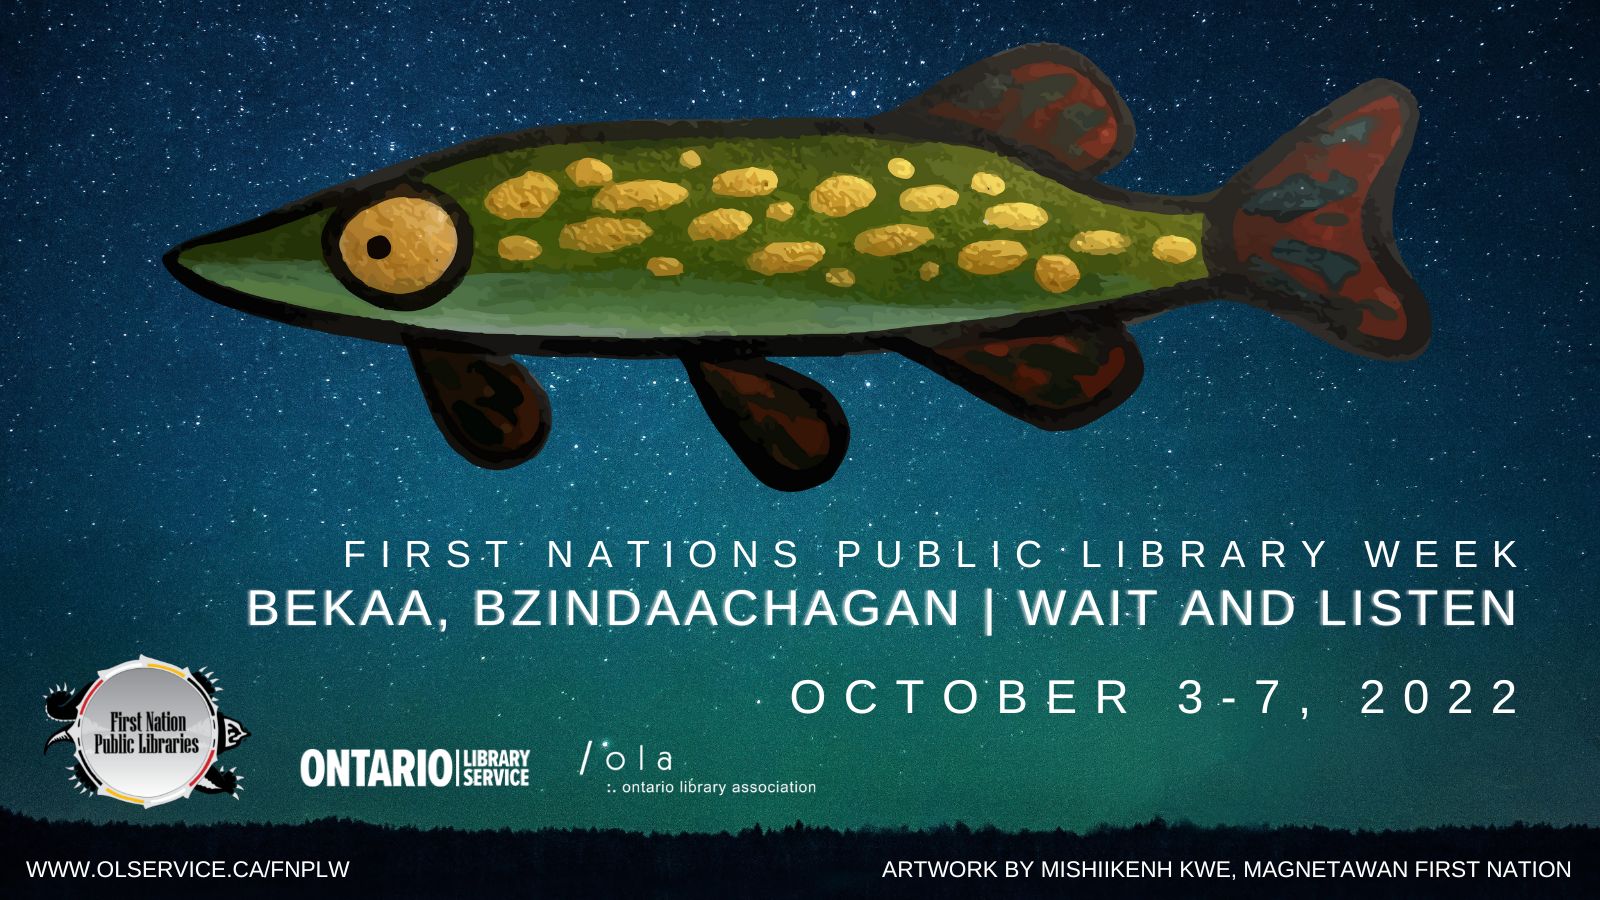 A painted green fish with gold scales over a background of a starry sky and silhouetted trees. Text reads FIRST NATIONS PUBLIC LIBRARY WEEK BEKAA, BZINDAACHAGAN | WAIT AND LISTEN OCTOBER 3-7. 2022.